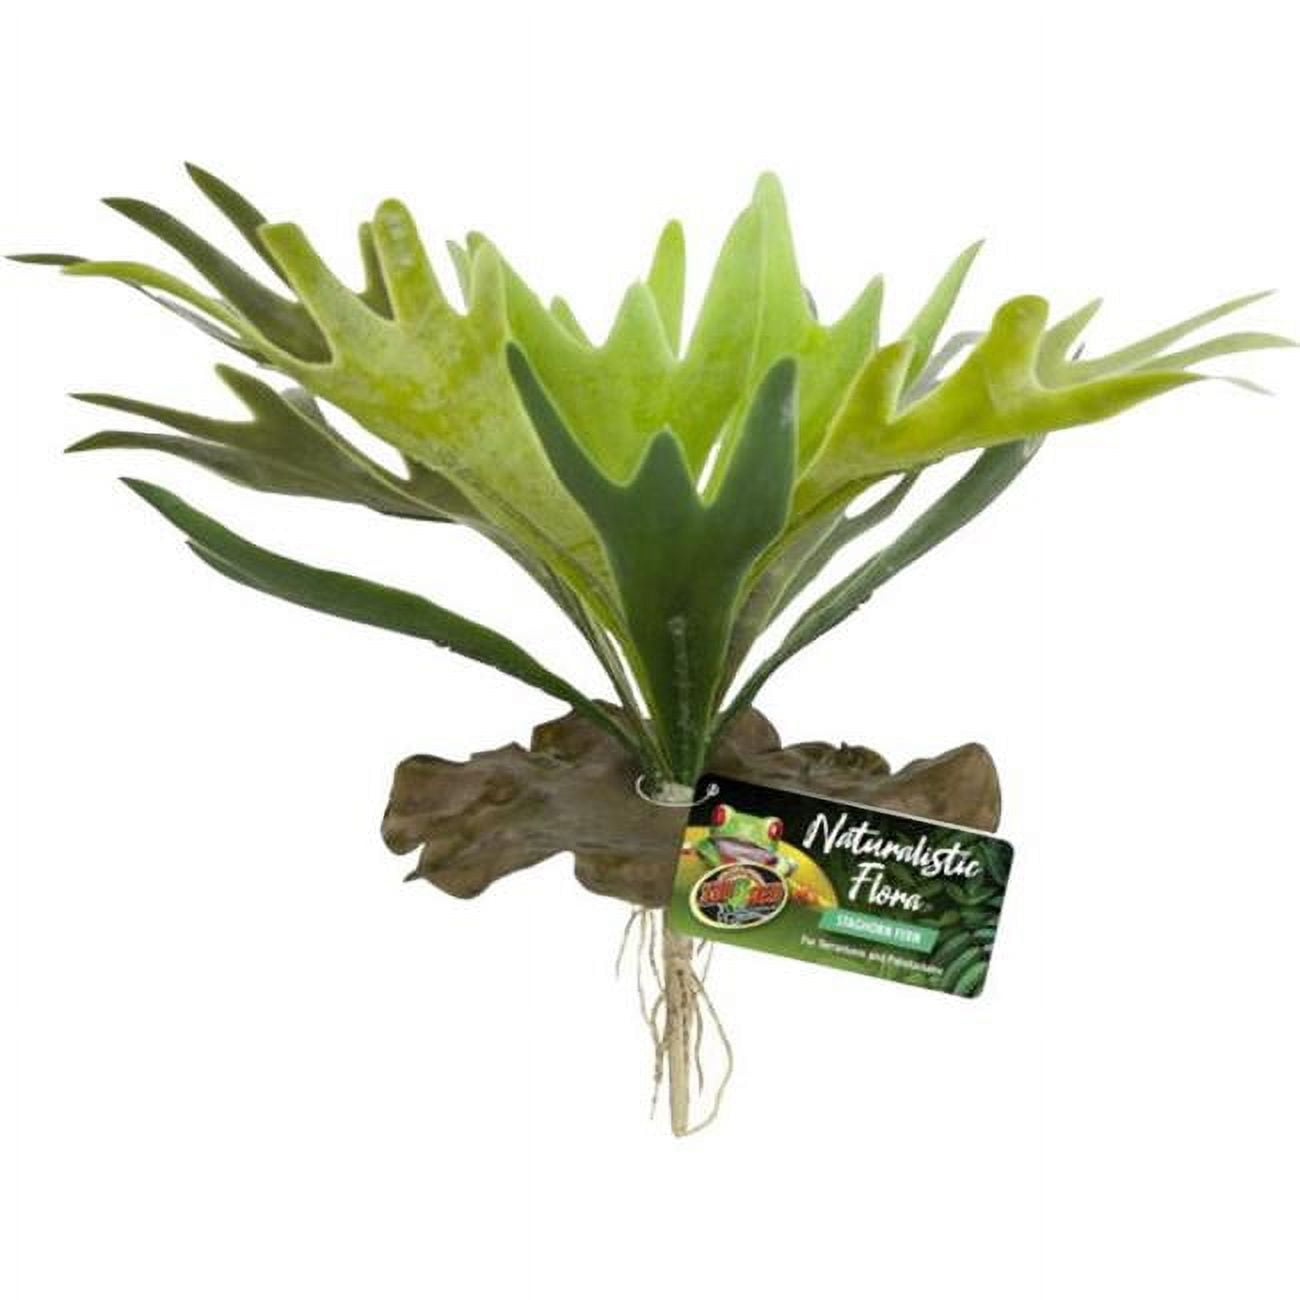 Picture of Zoo Med Laboratories BU-65 Naturalistic Flora Staghorn Fern